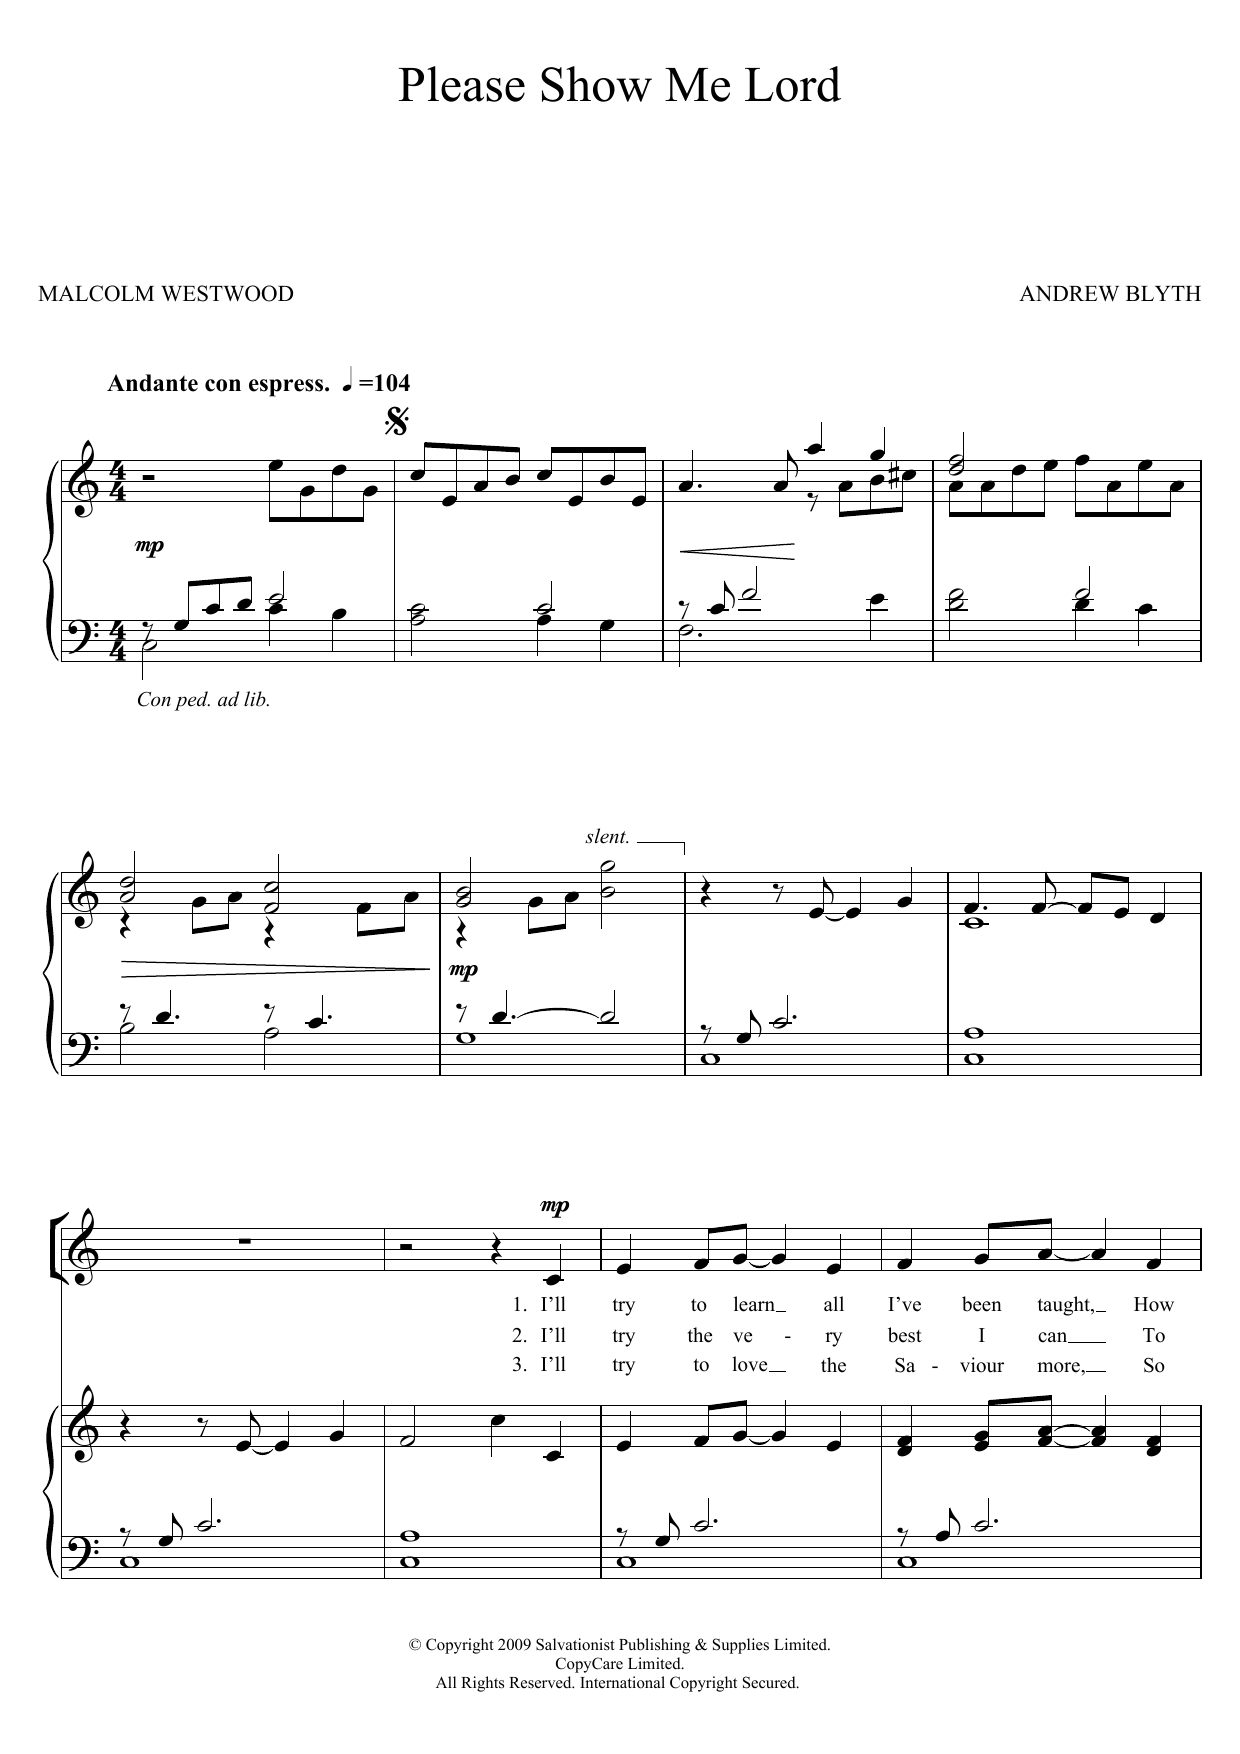 Download The Salvation Army Please Show Me Lord Sheet Music